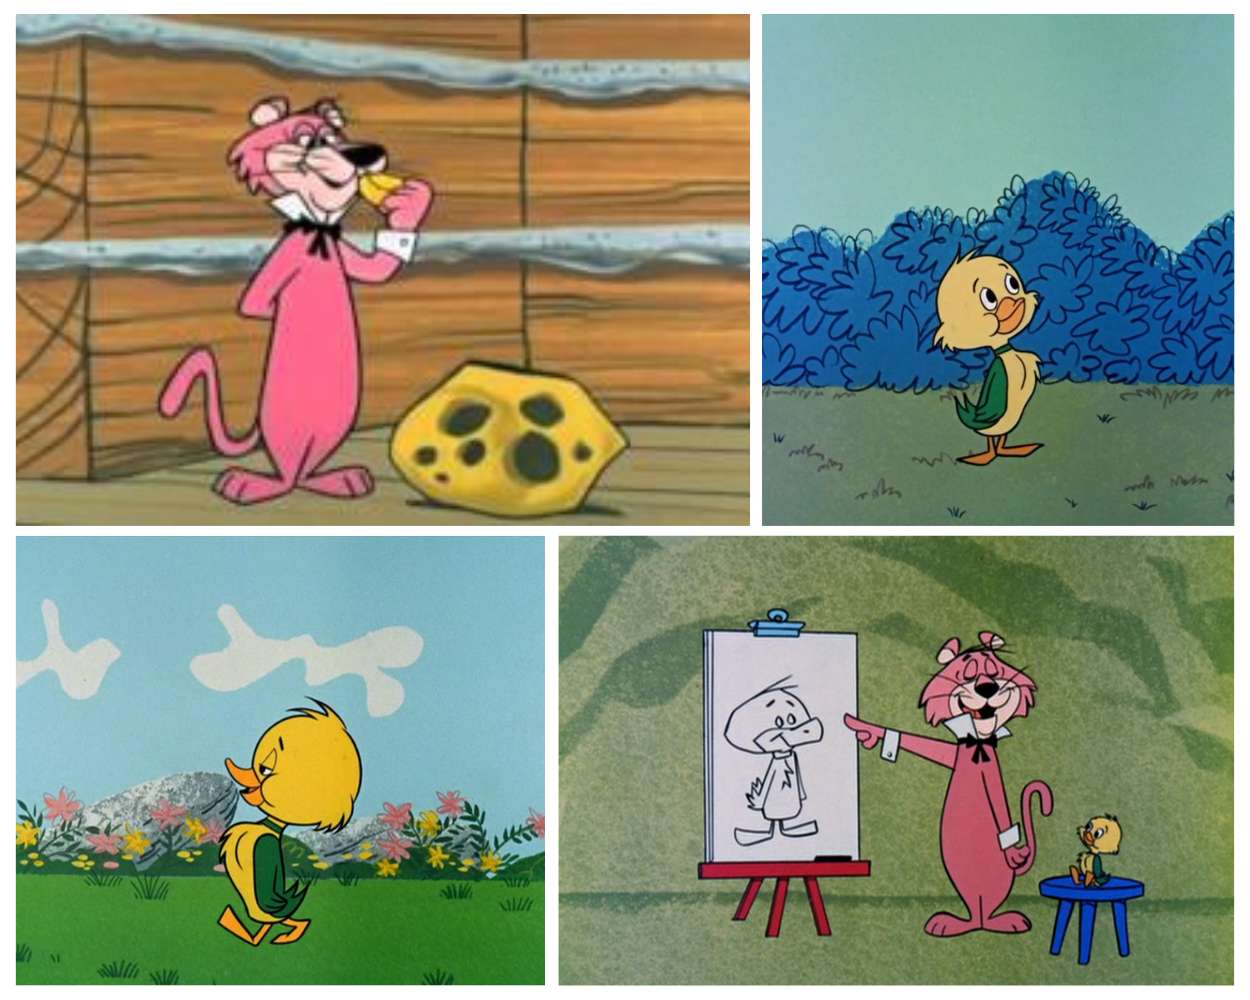 Snagglepuss and Yakky Doodle